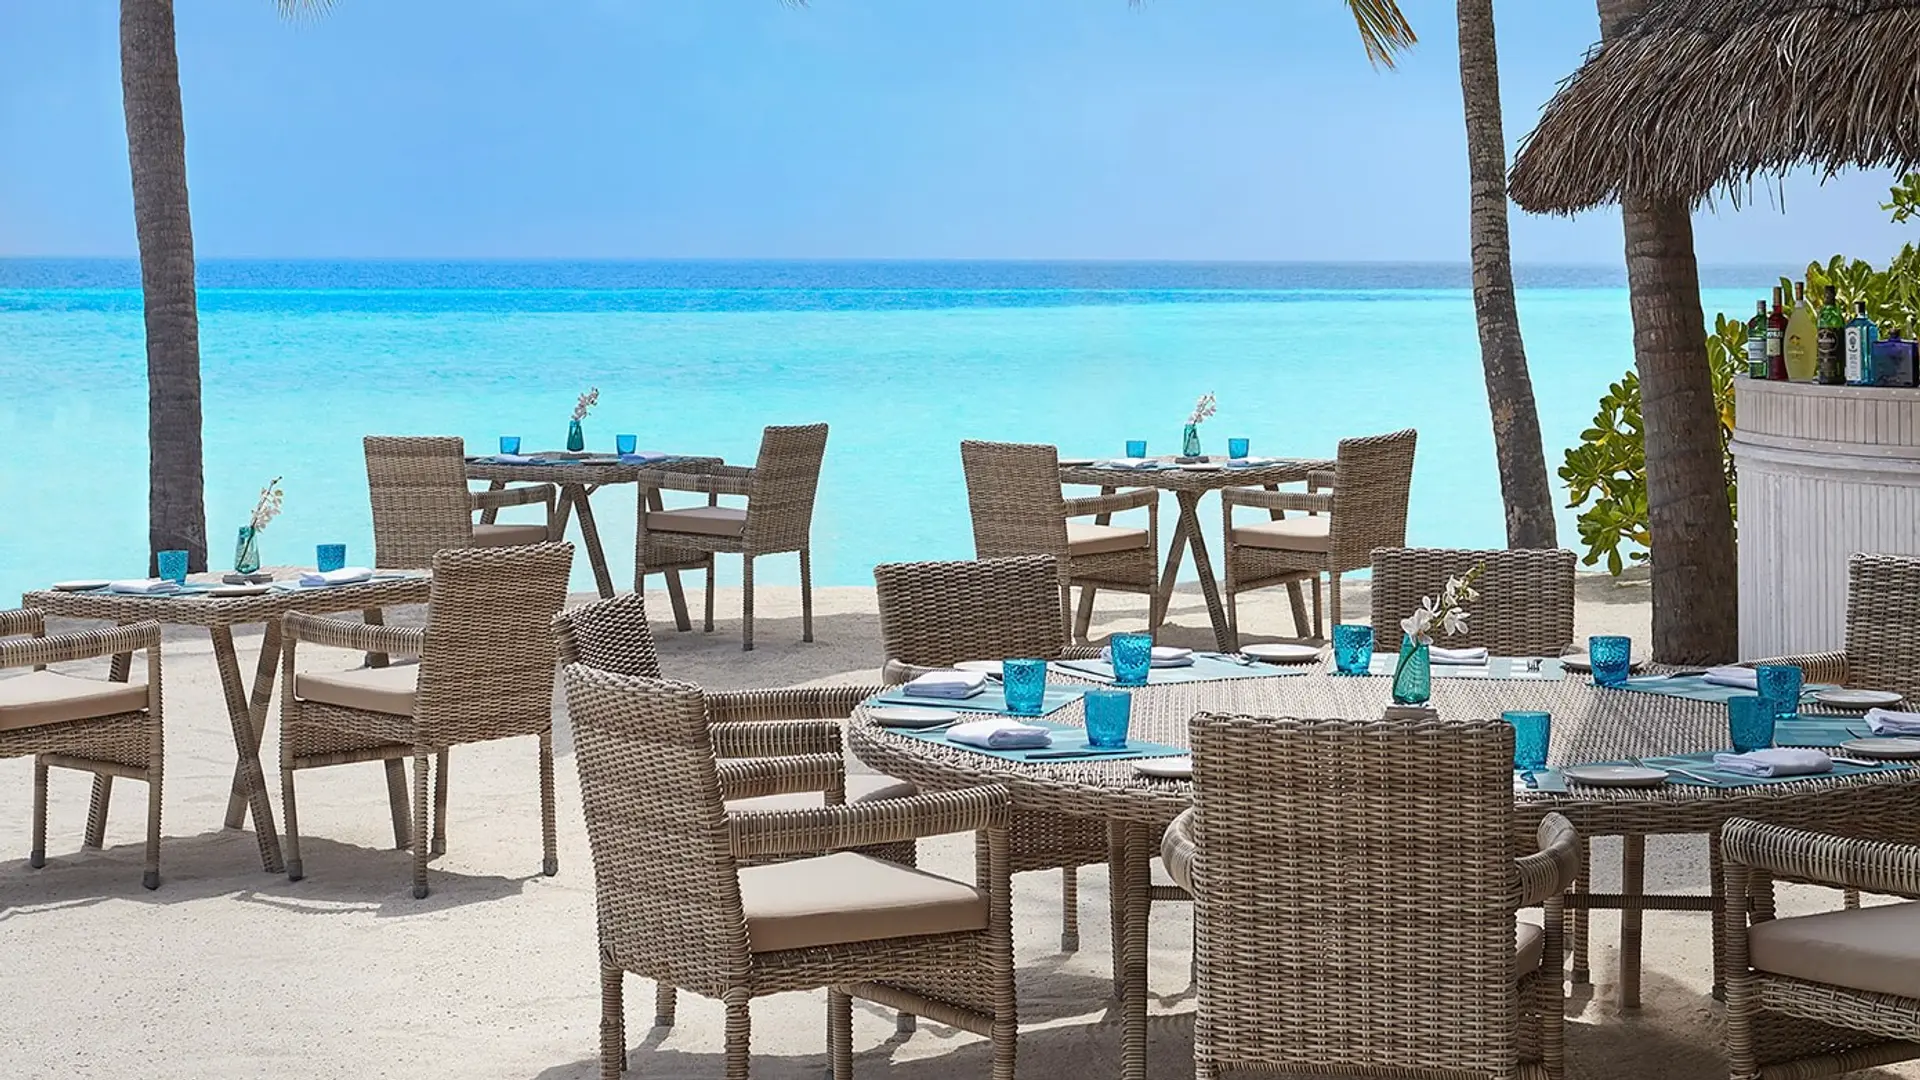 Hotel review Restaurants & Bars' - One&Only Reethi Rah - 2